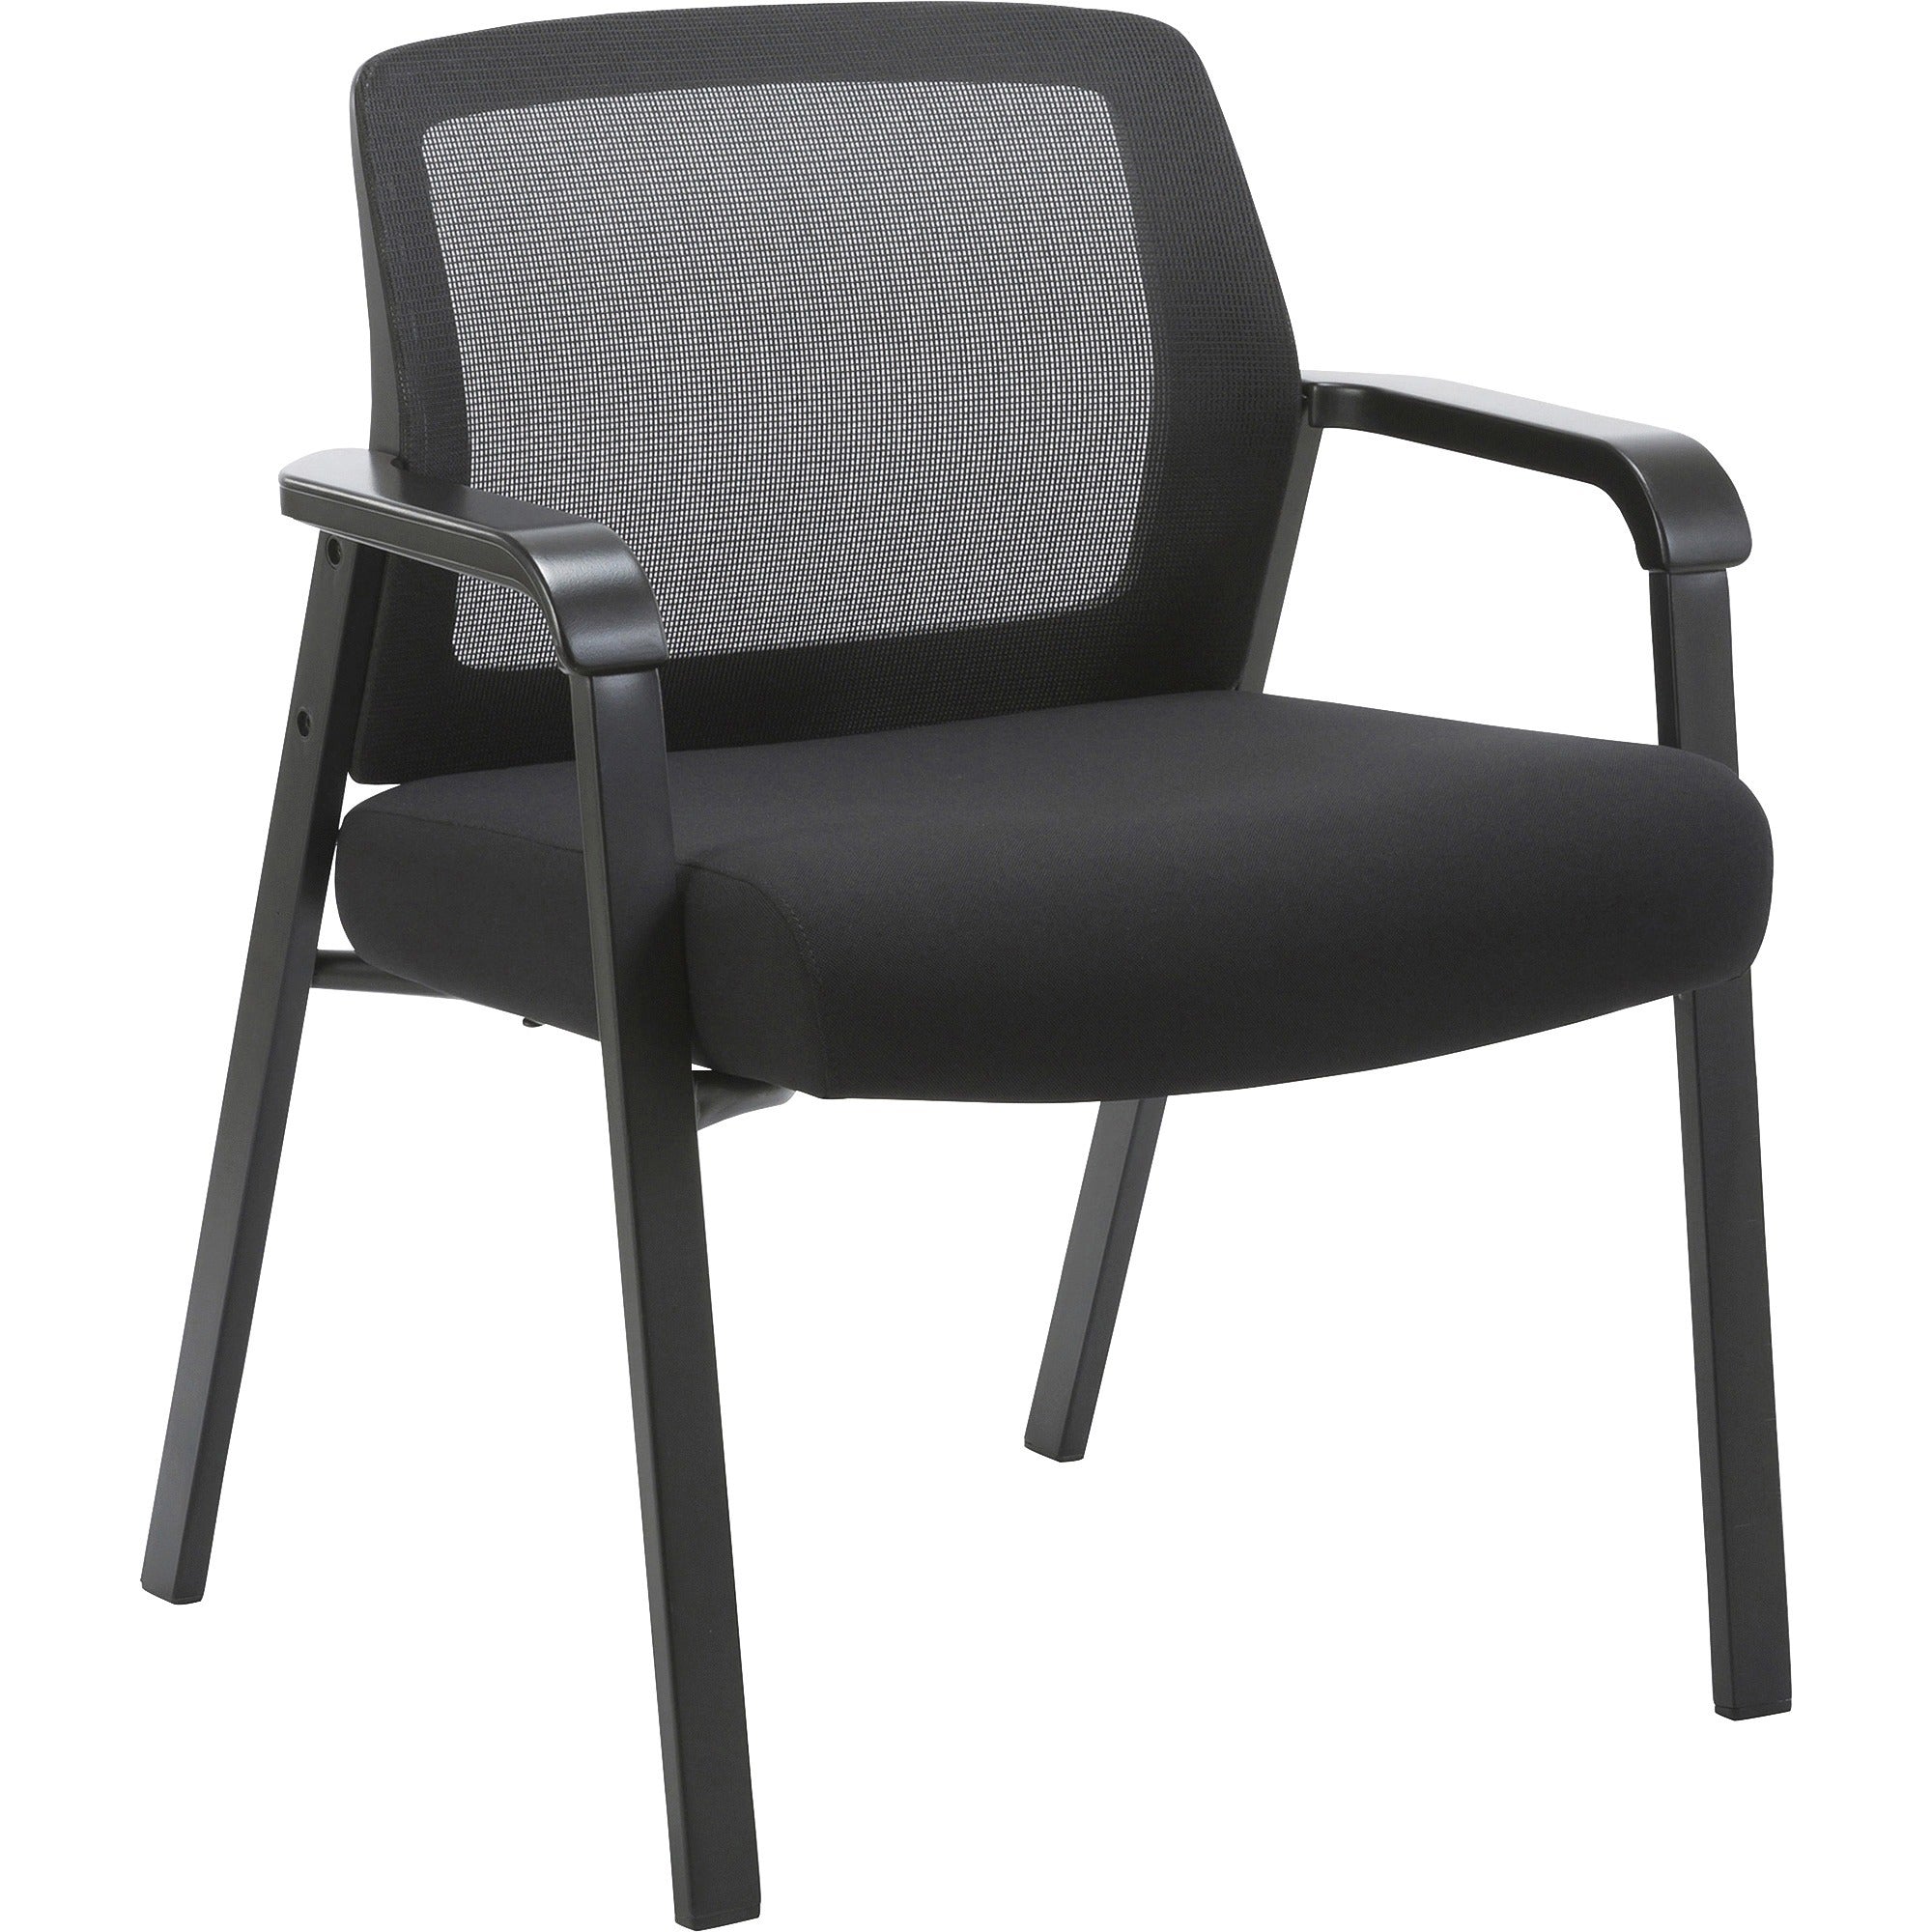 lorell-big-&-tall-mesh-low-back-guest-chair-fabric-seat-mesh-back-steel-frame-low-back-black-1-each_llr67003 - 1